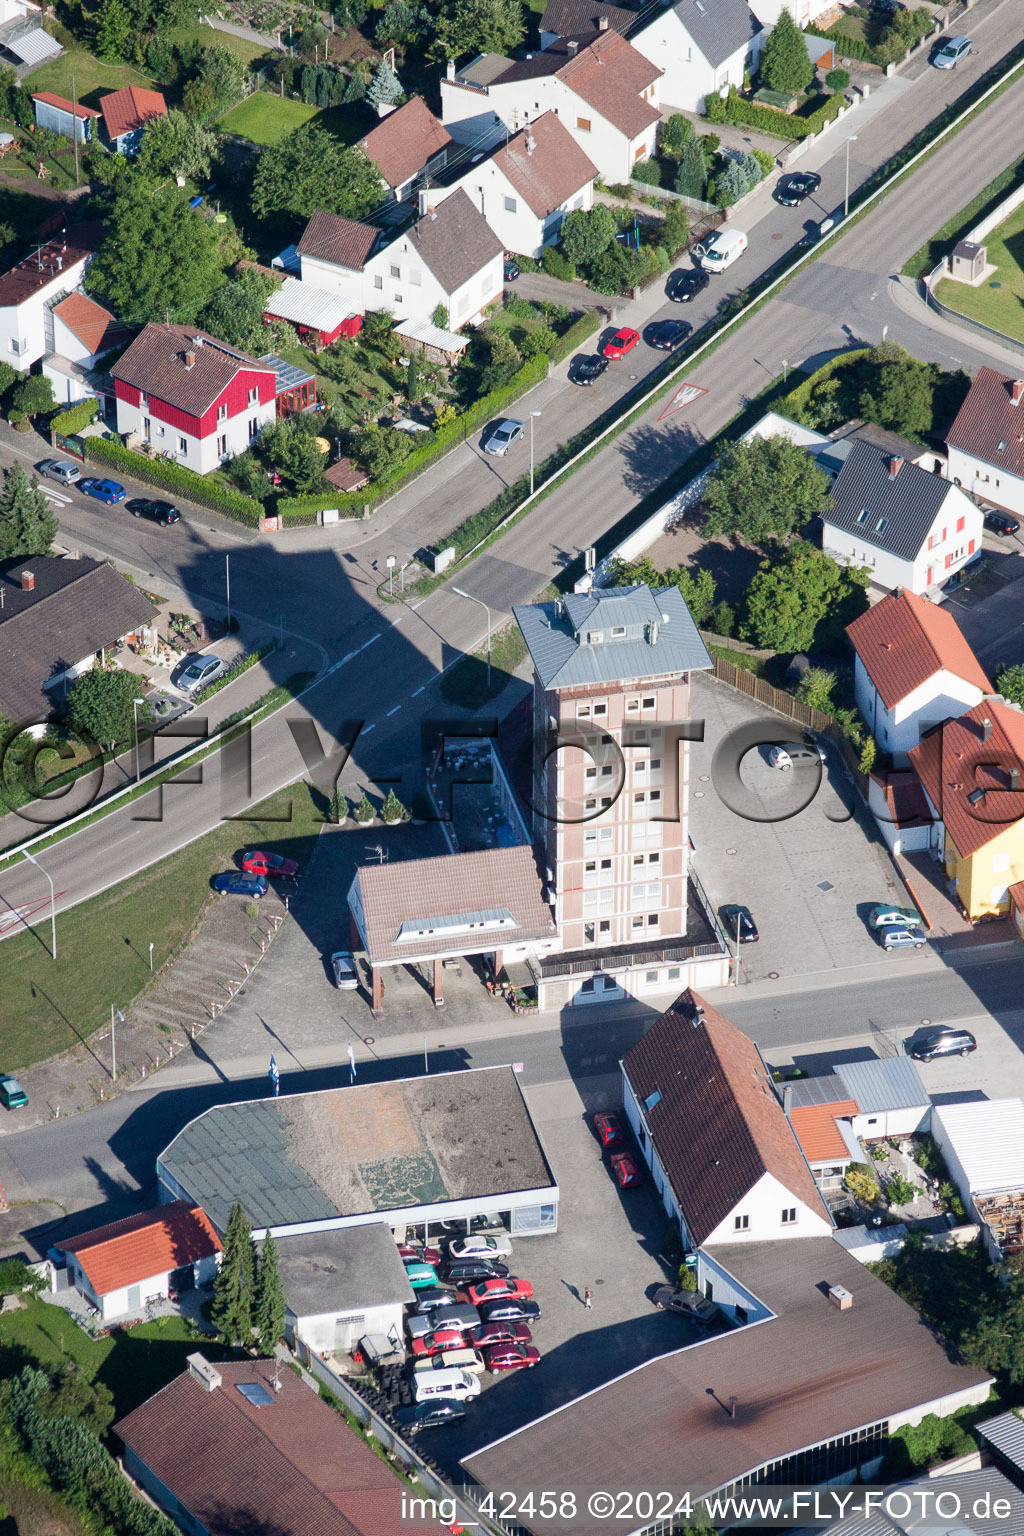 Aerial photograpy of High-rise building Ludovici in Jockgrim in the state Rhineland-Palatinate, Germany